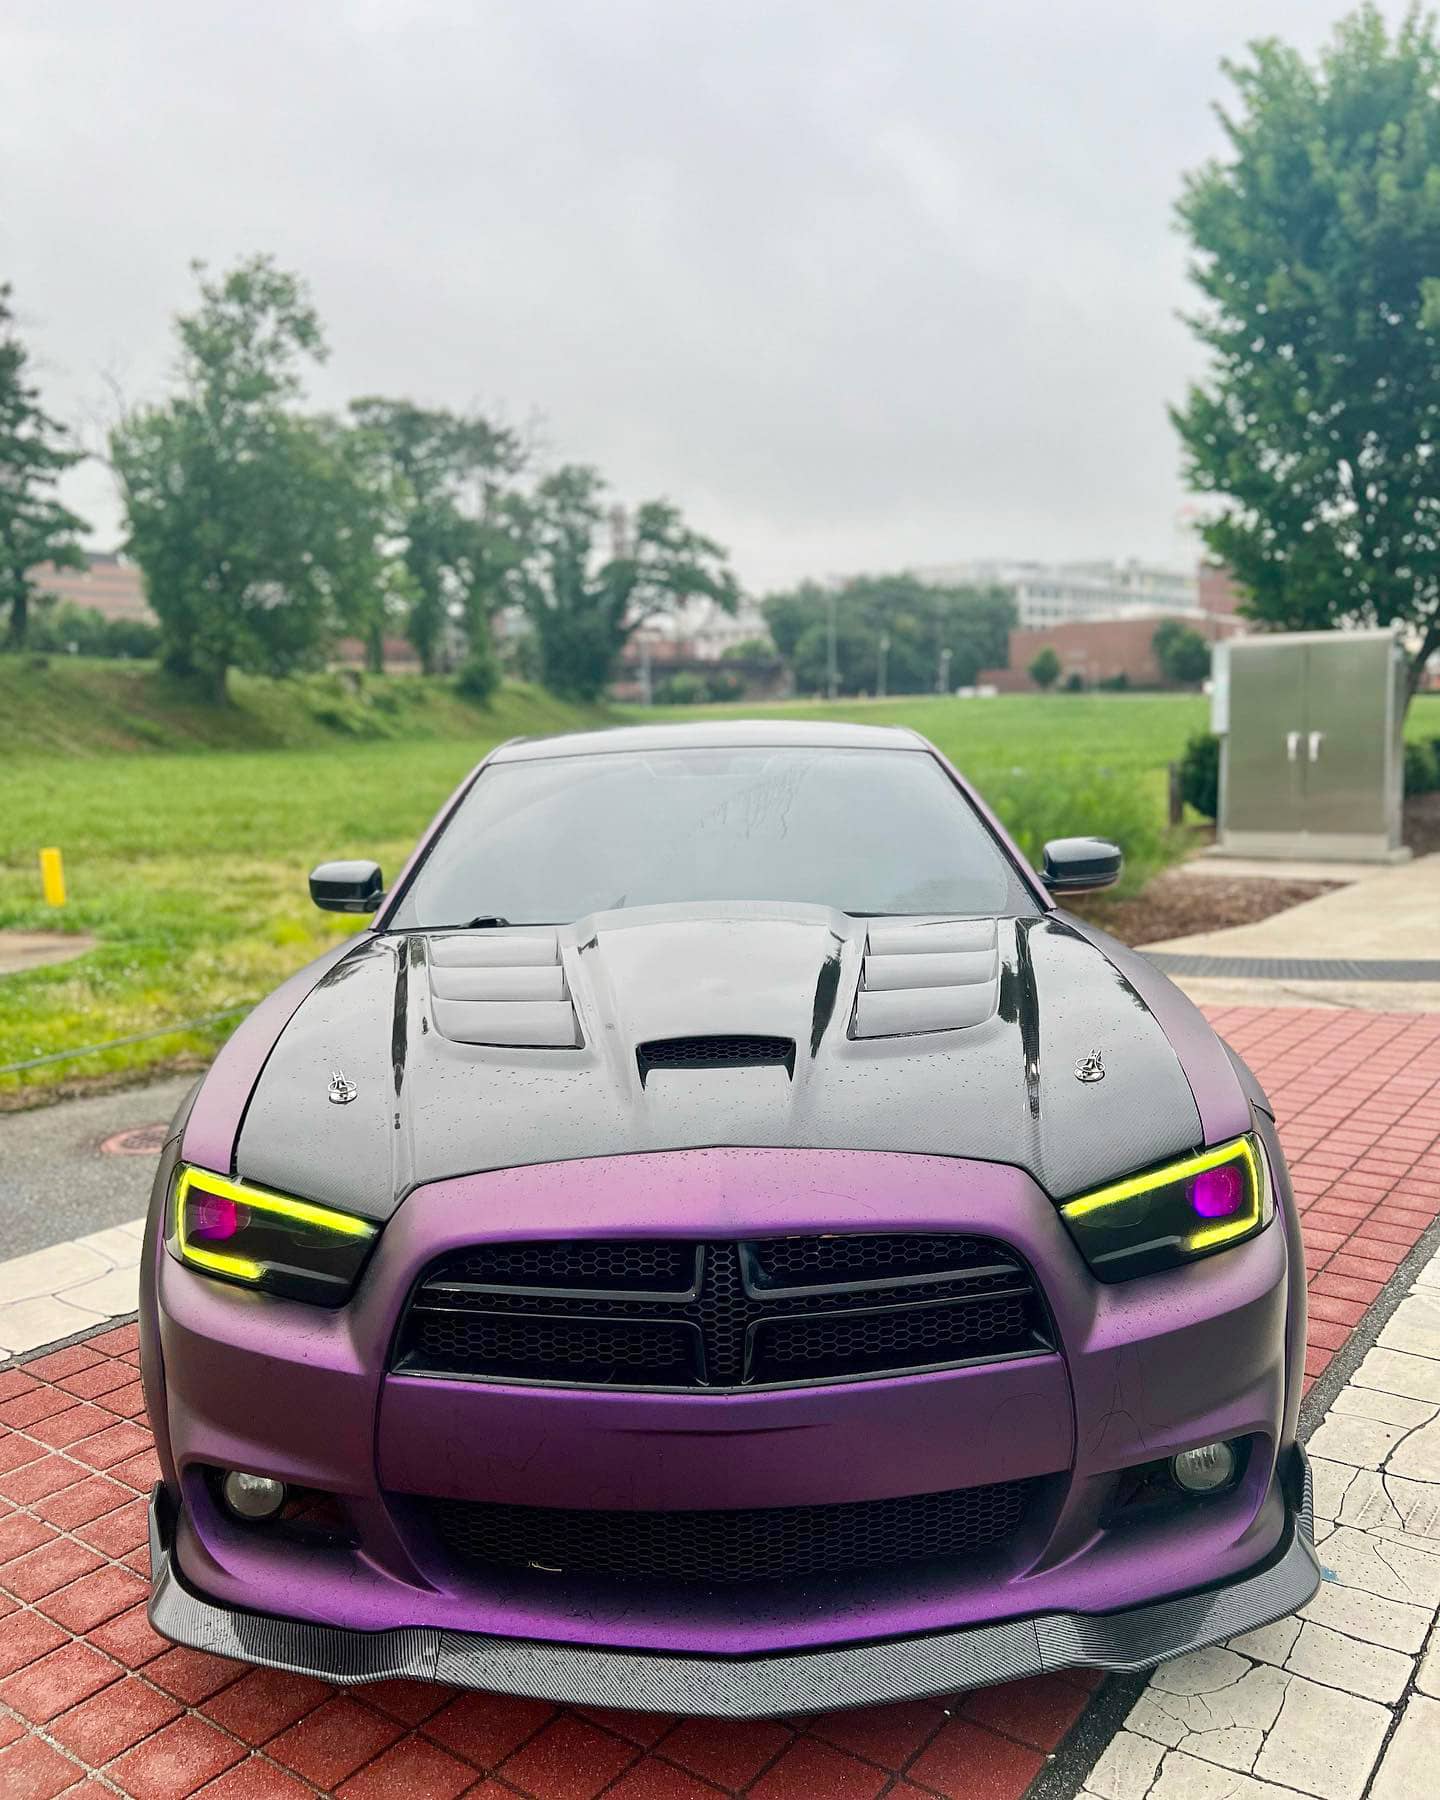 2012 Dodge Charger Pursuit custom headlights with color changing LED light bars